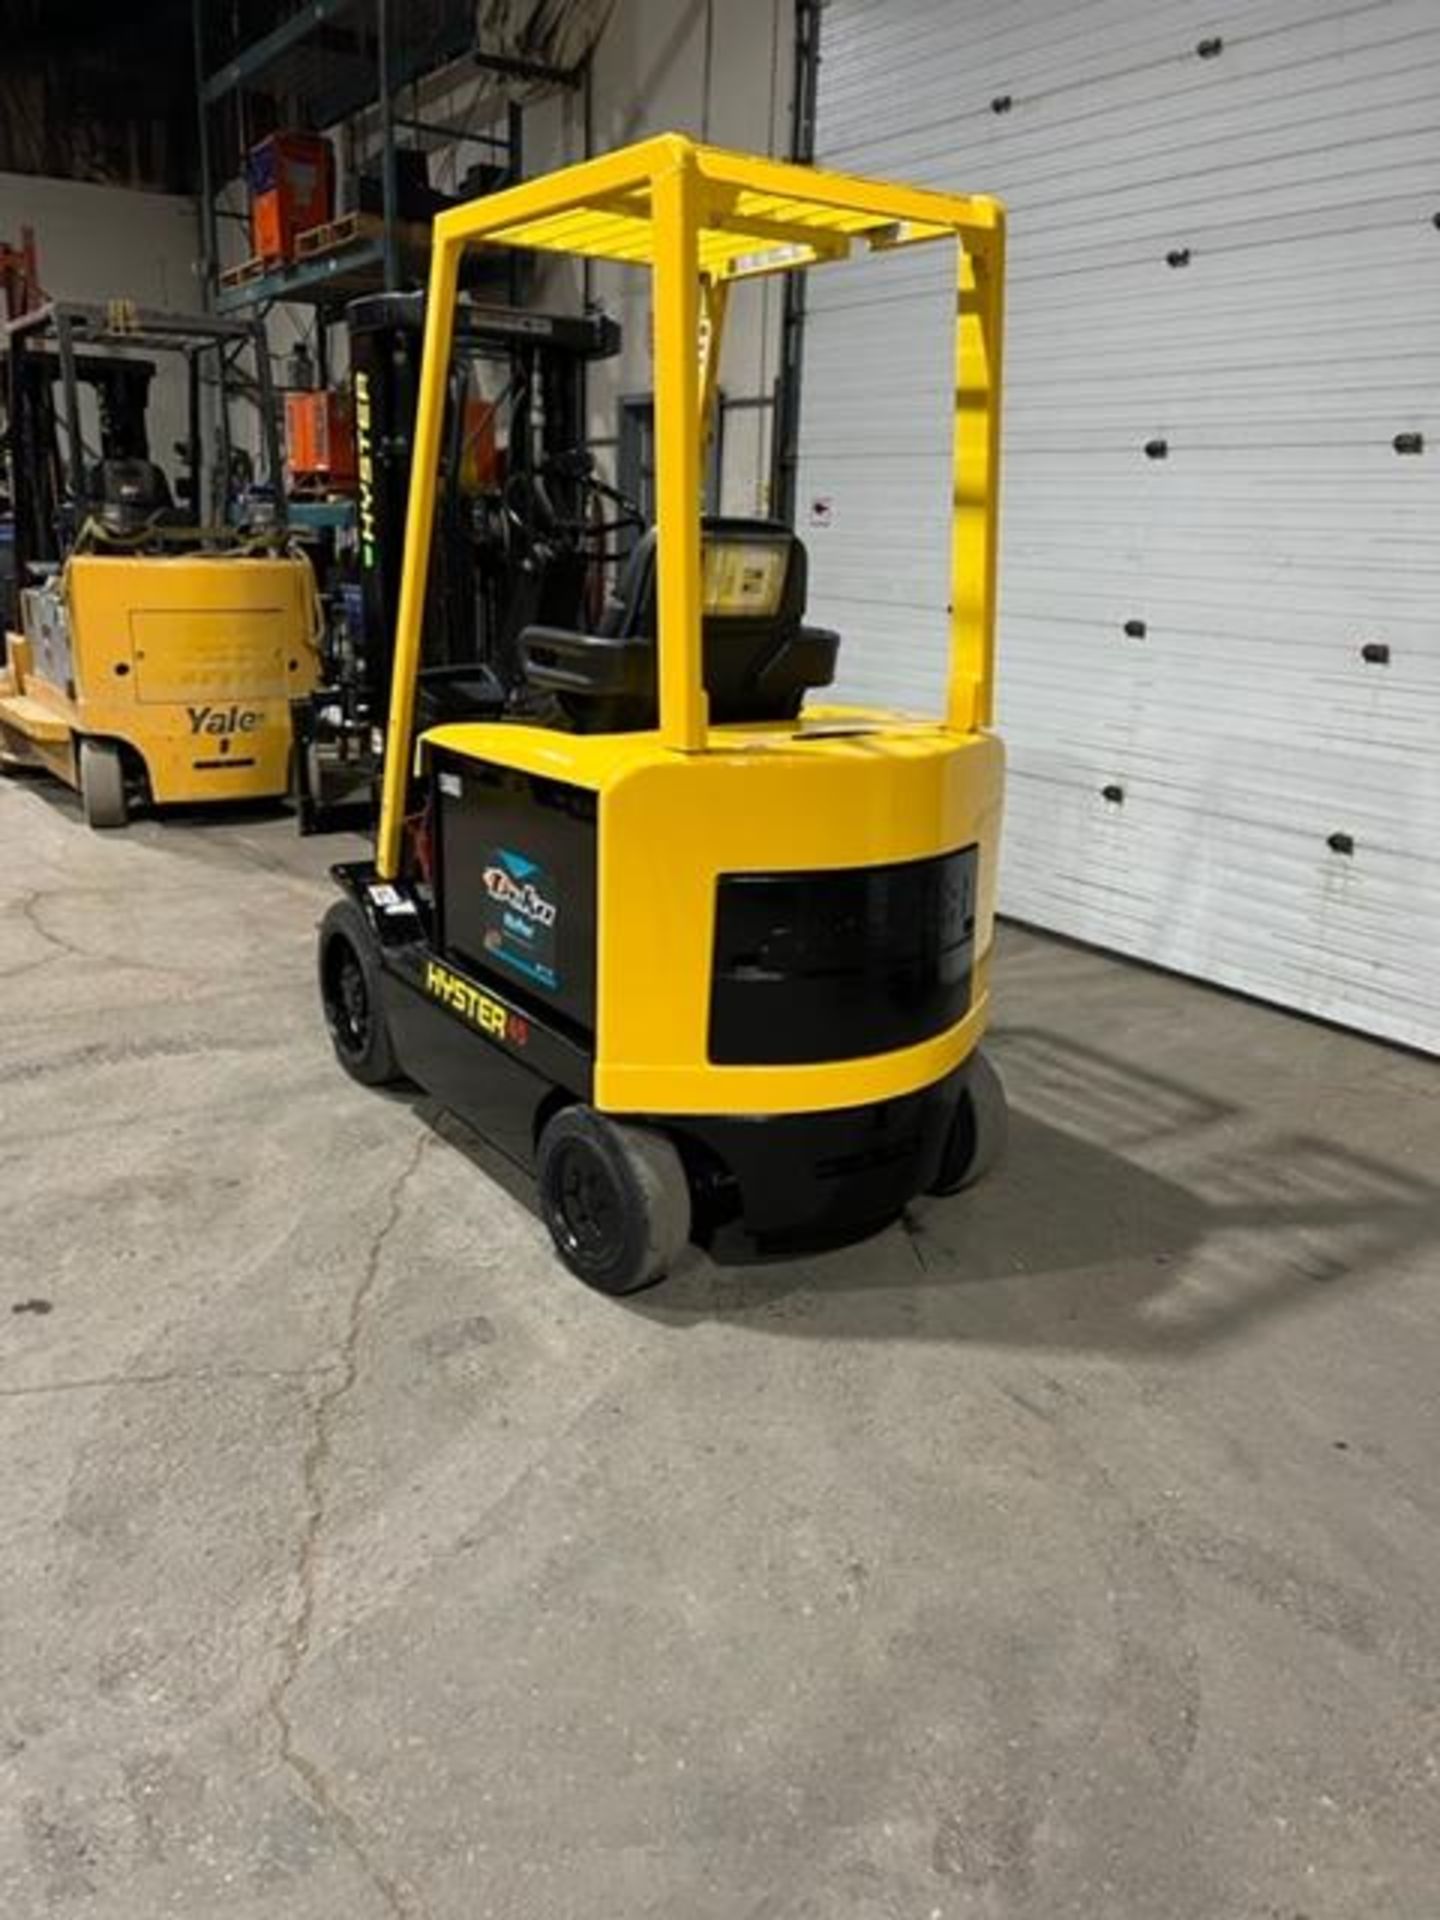 NICE 2008 Hyster model 45 - 4,500lbs Capacity Forklift Electric with Sideshift Option of - Image 3 of 3